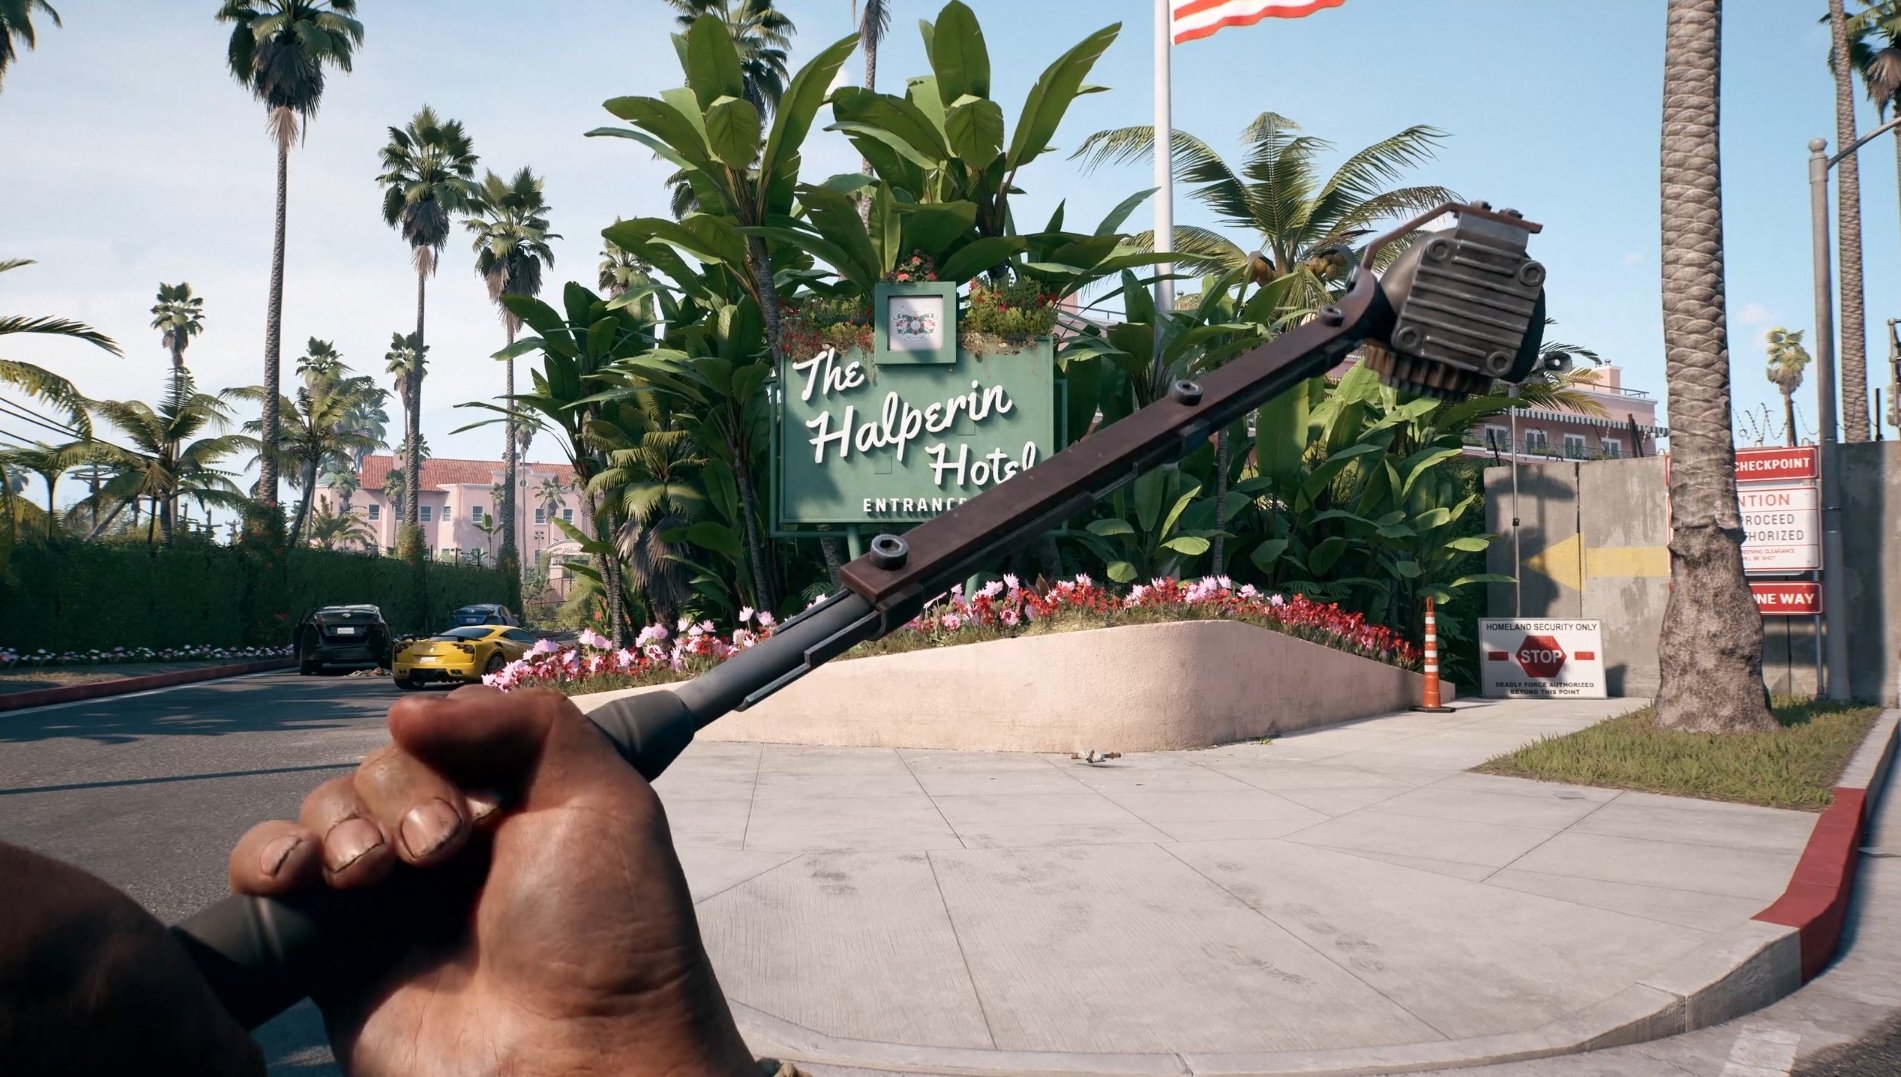 How to change outfit in Dead Island 2 with character packs